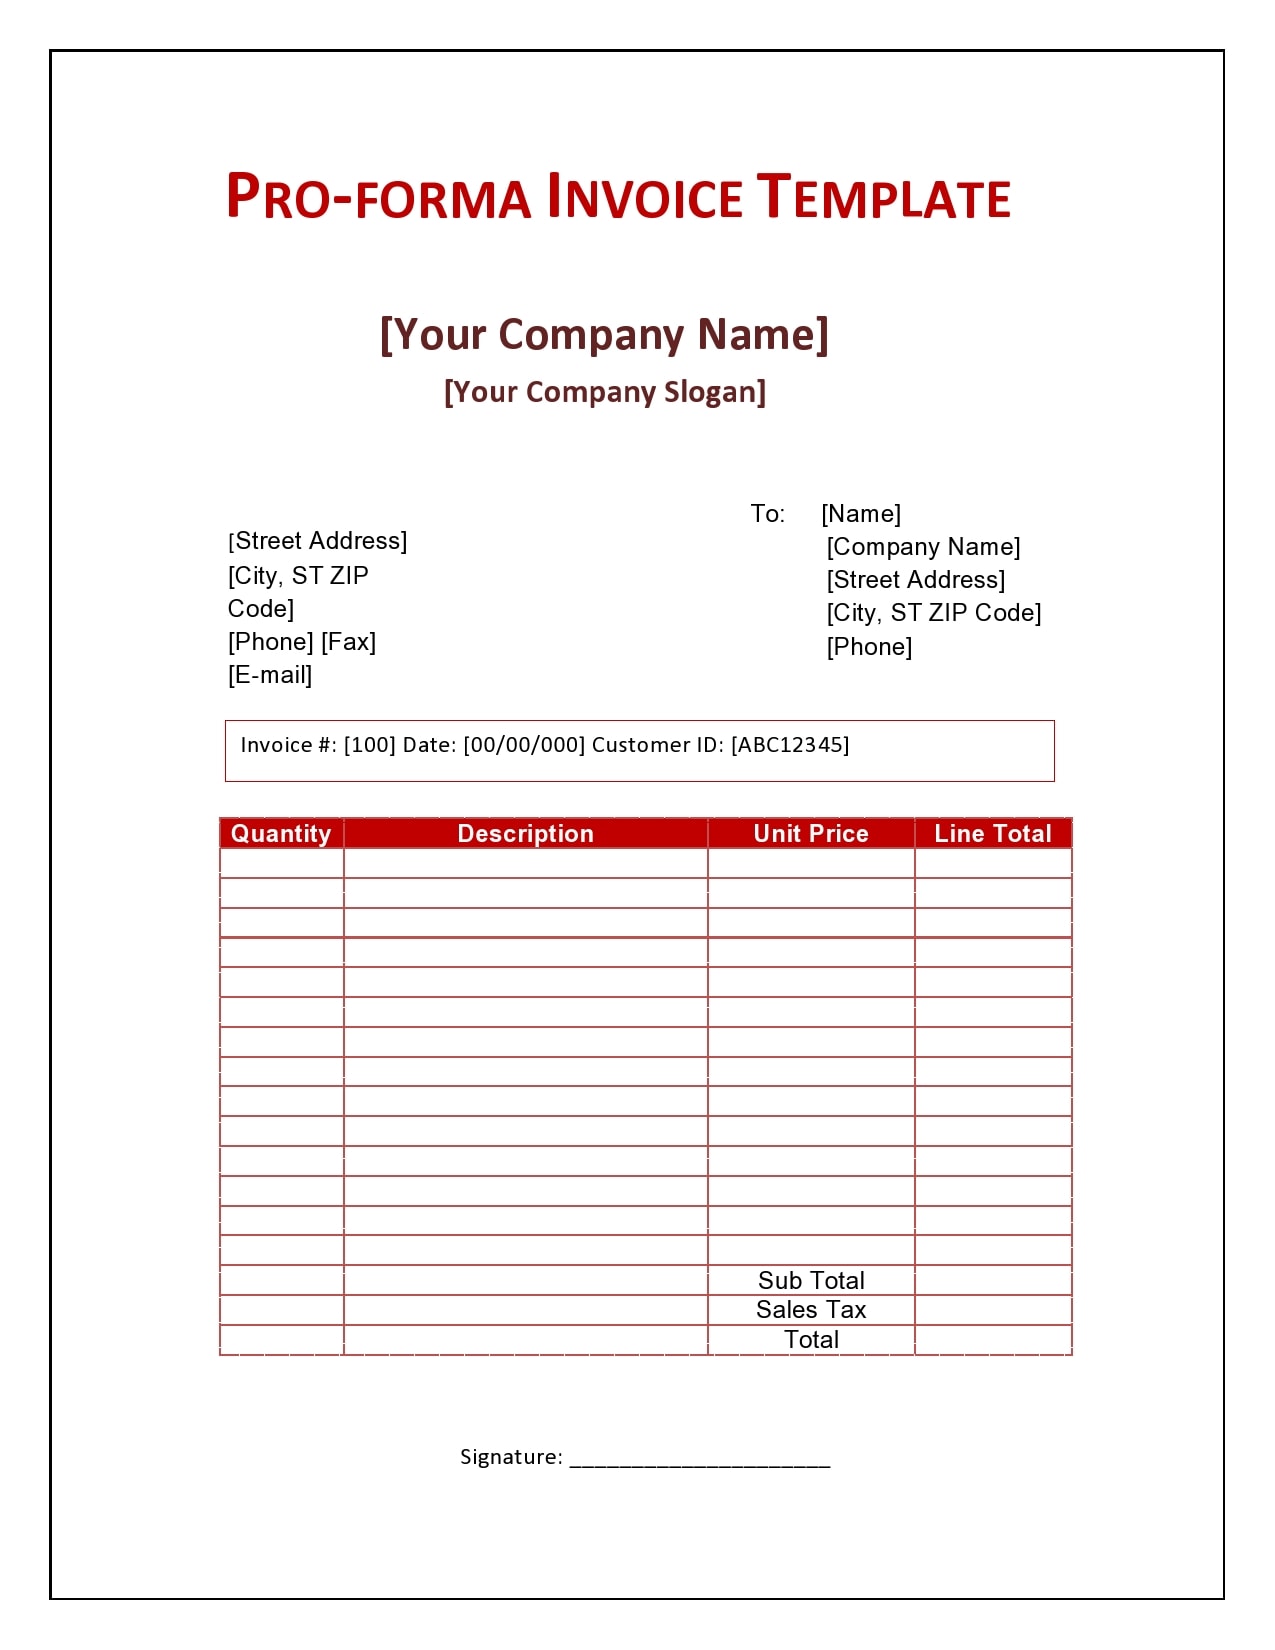 Proforma Invoice Excel from templatearchive.com